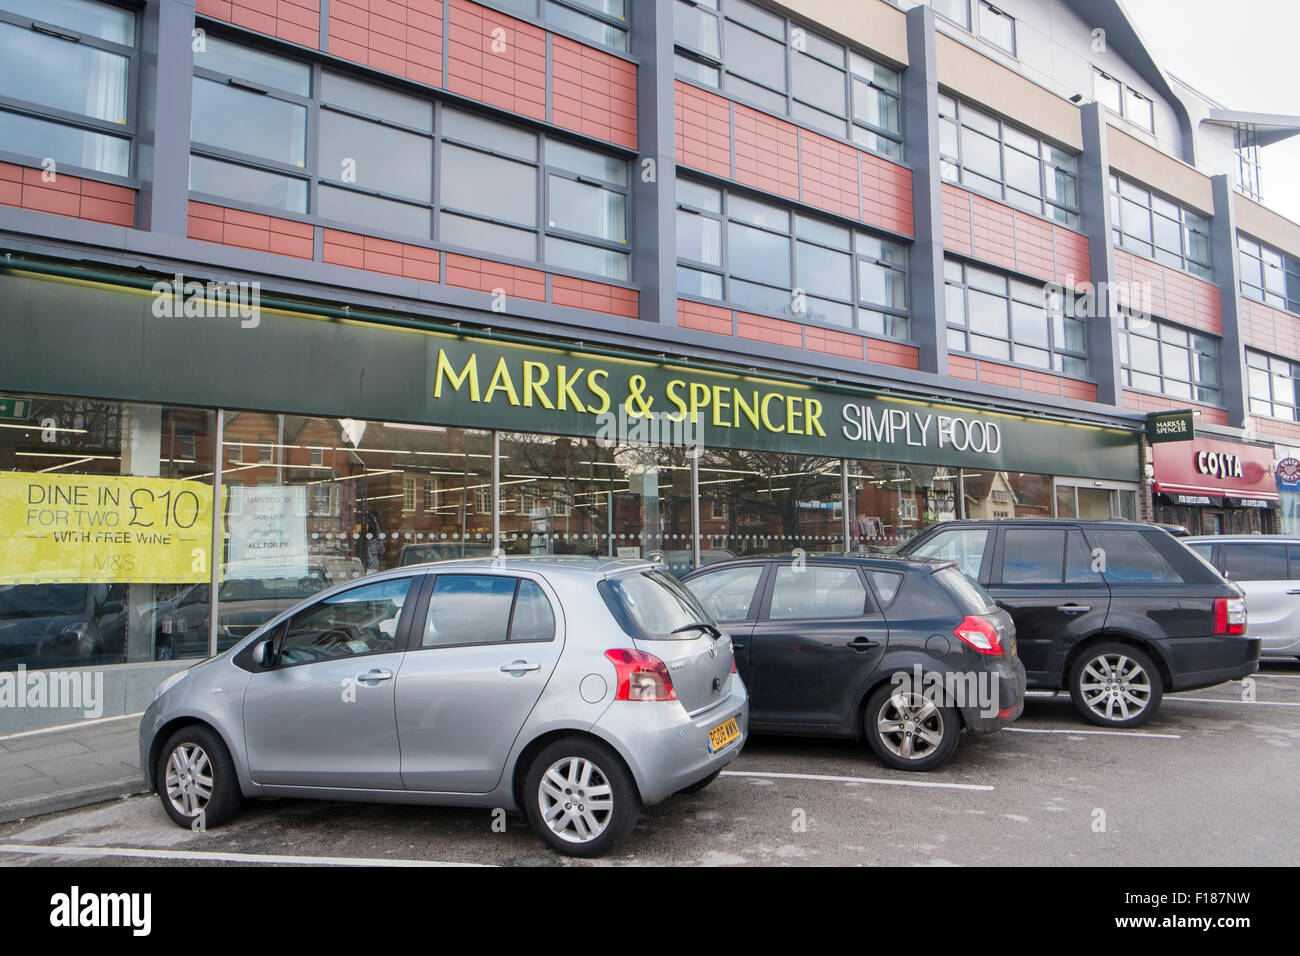 Marks and spencer st annes